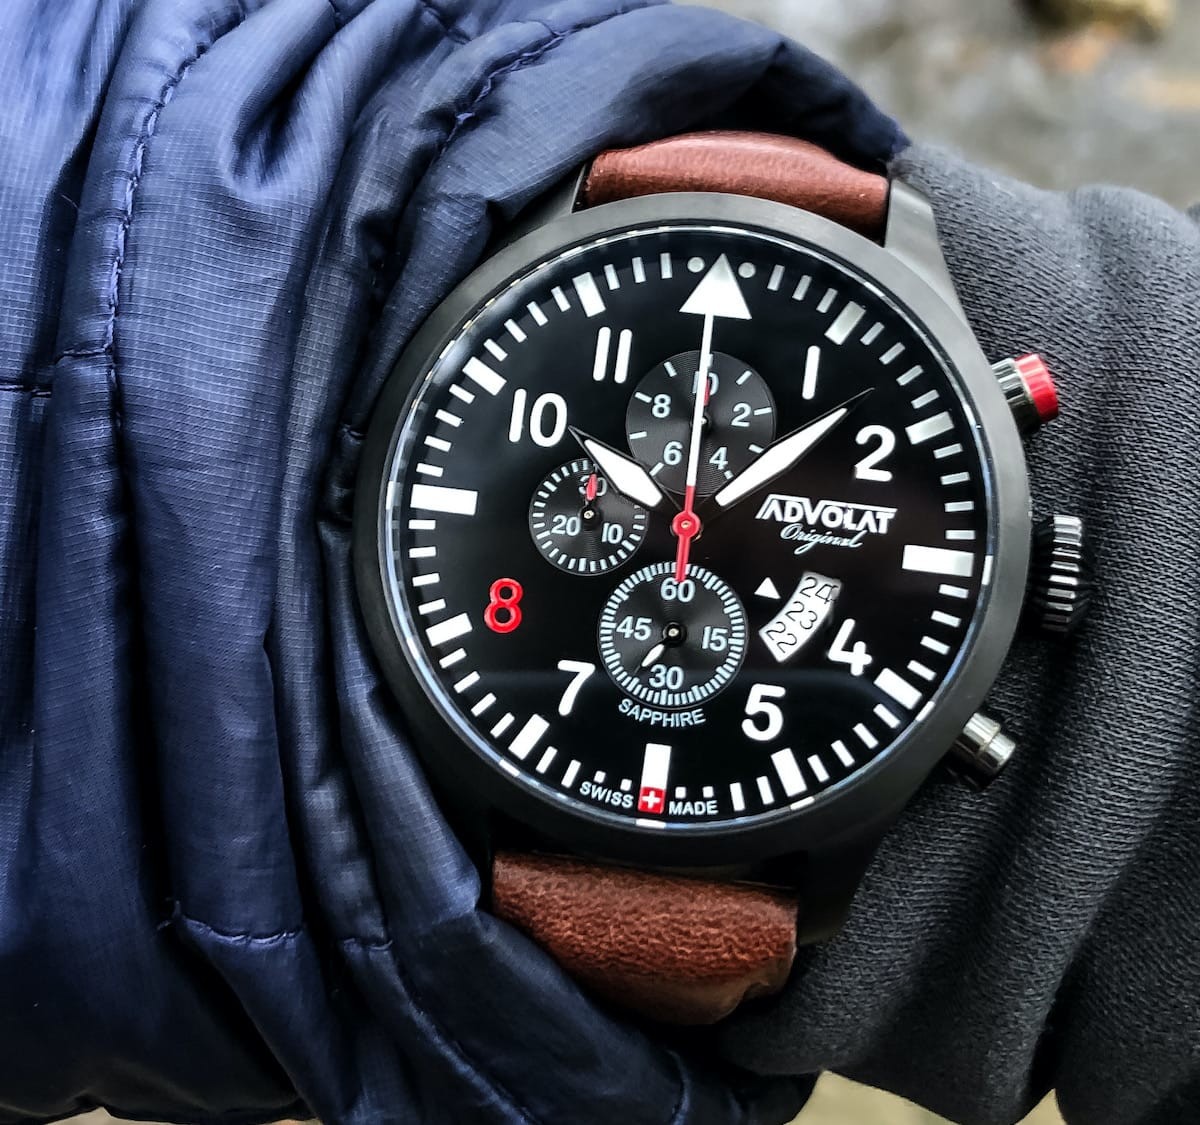 ADVOLAT FLIEGER 8 chronograph pilot watch has exceptional engineering and components